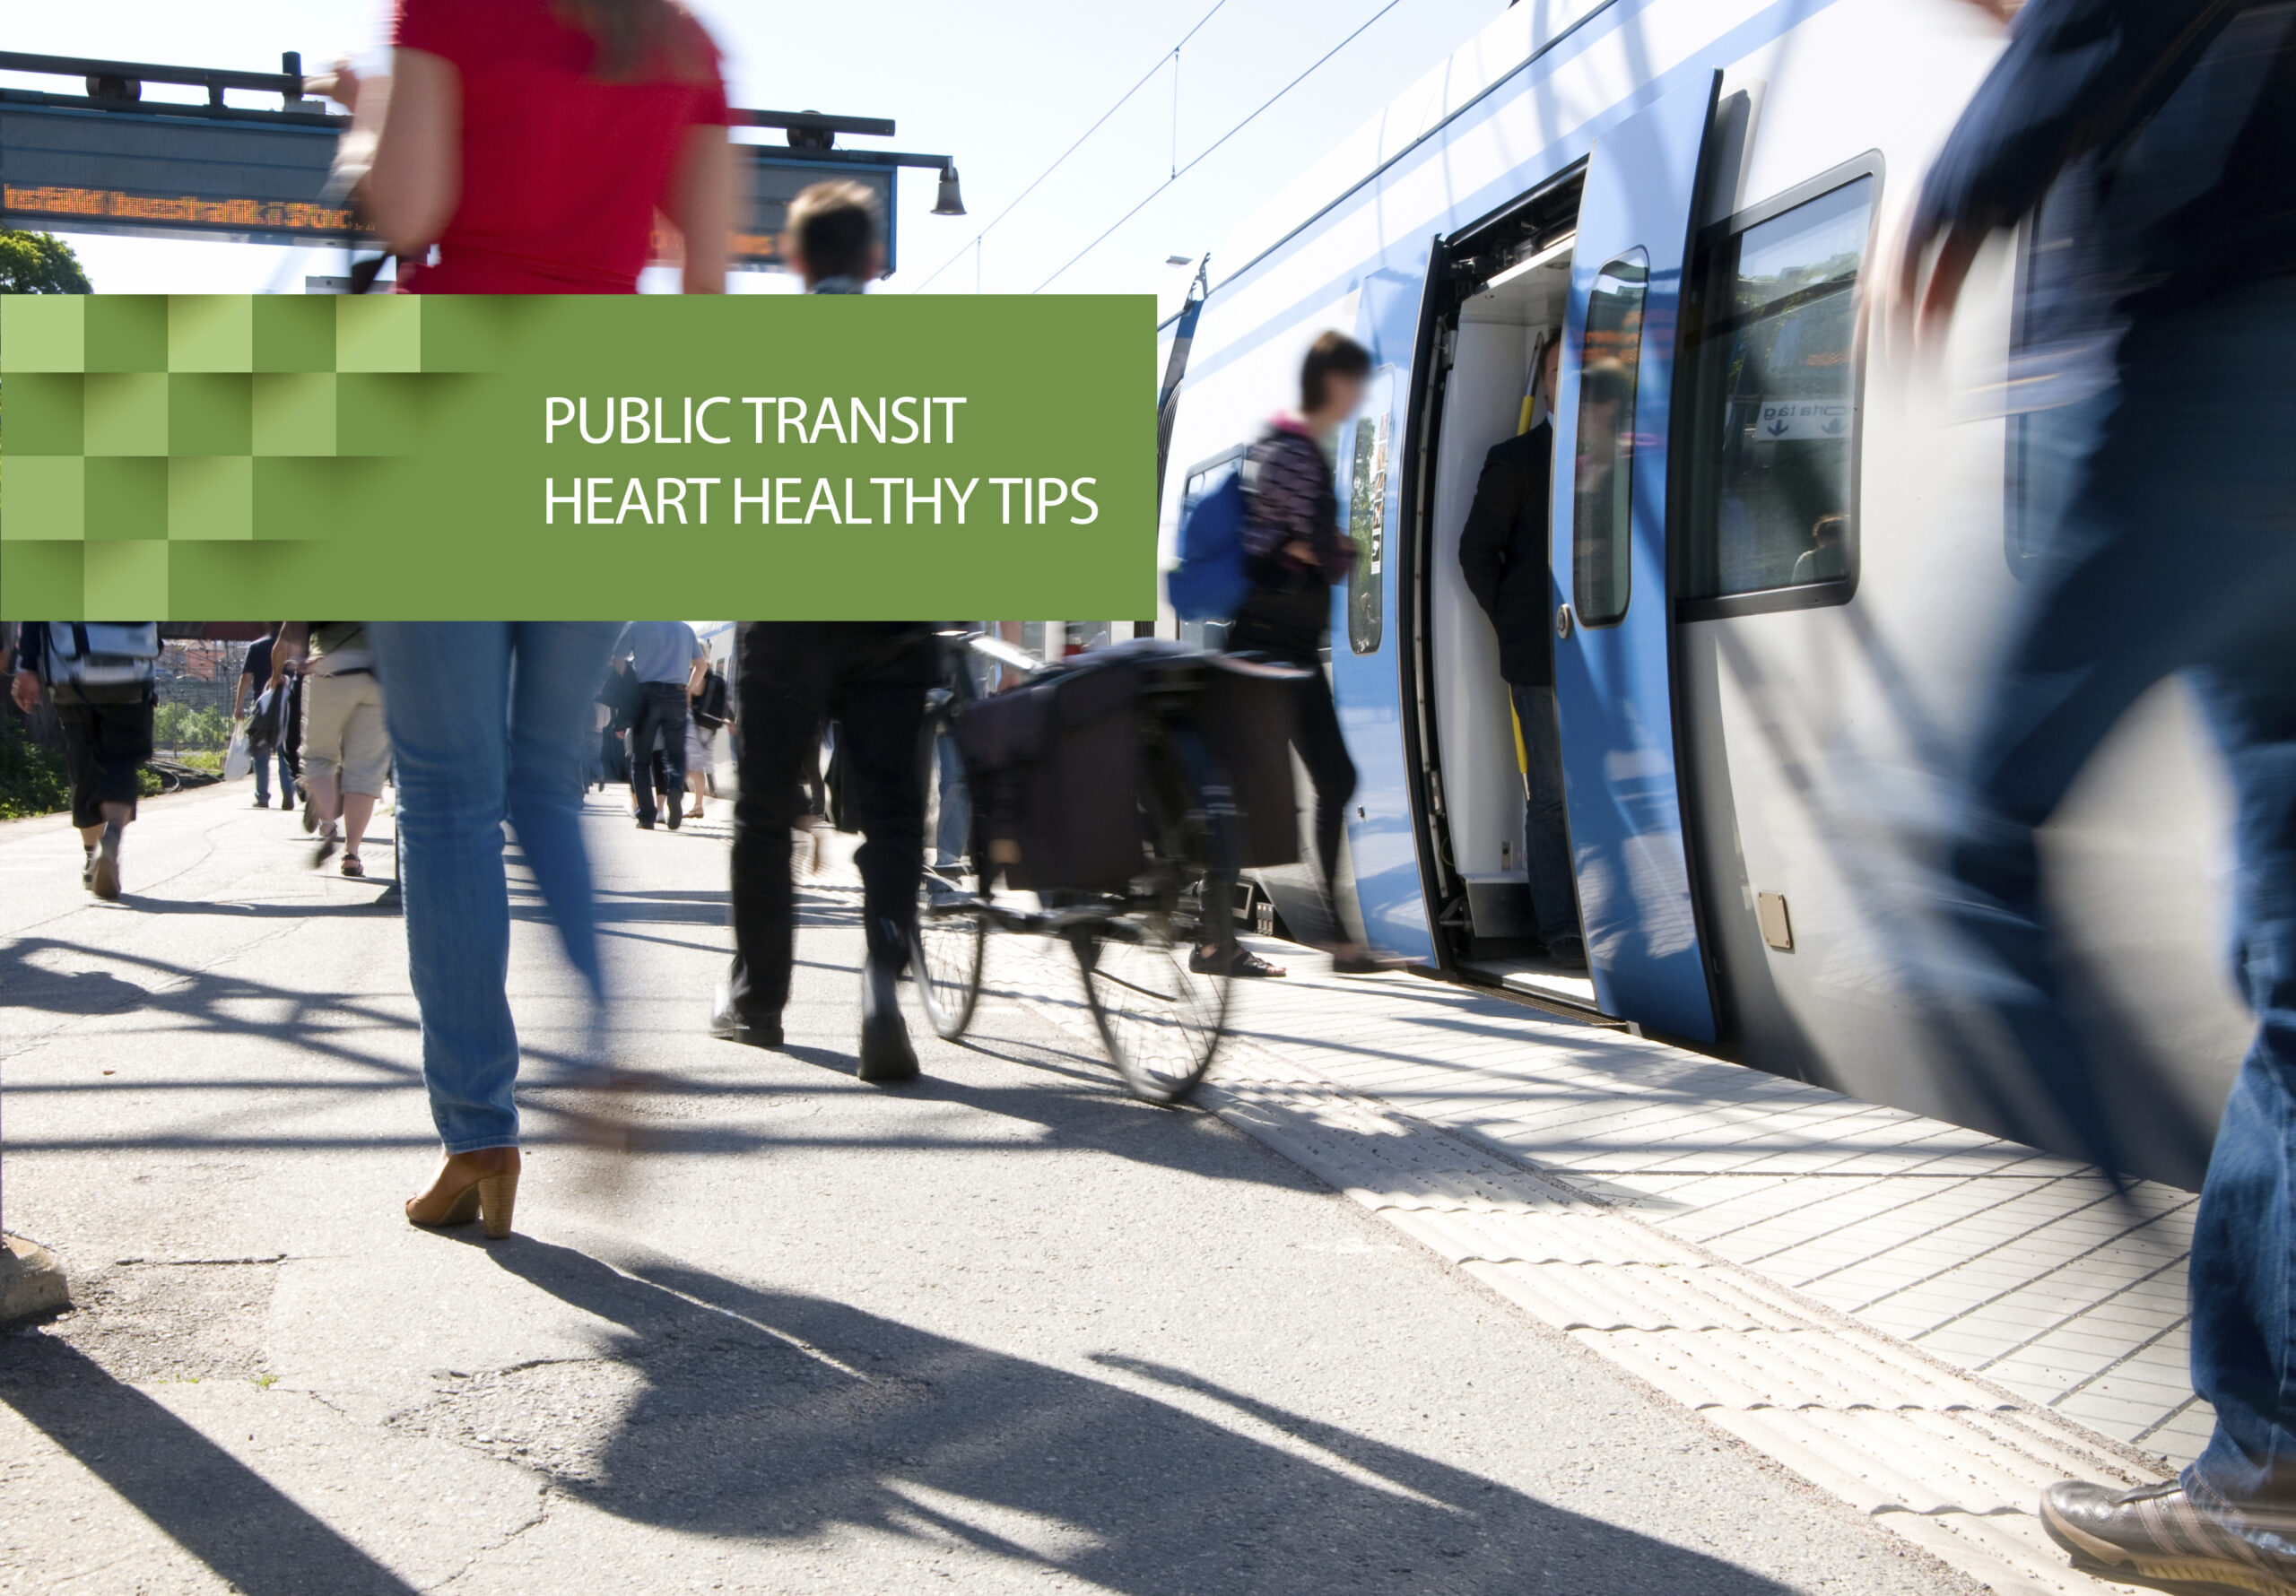 UPDATE: Ride Public Transit for a Healthier Heart